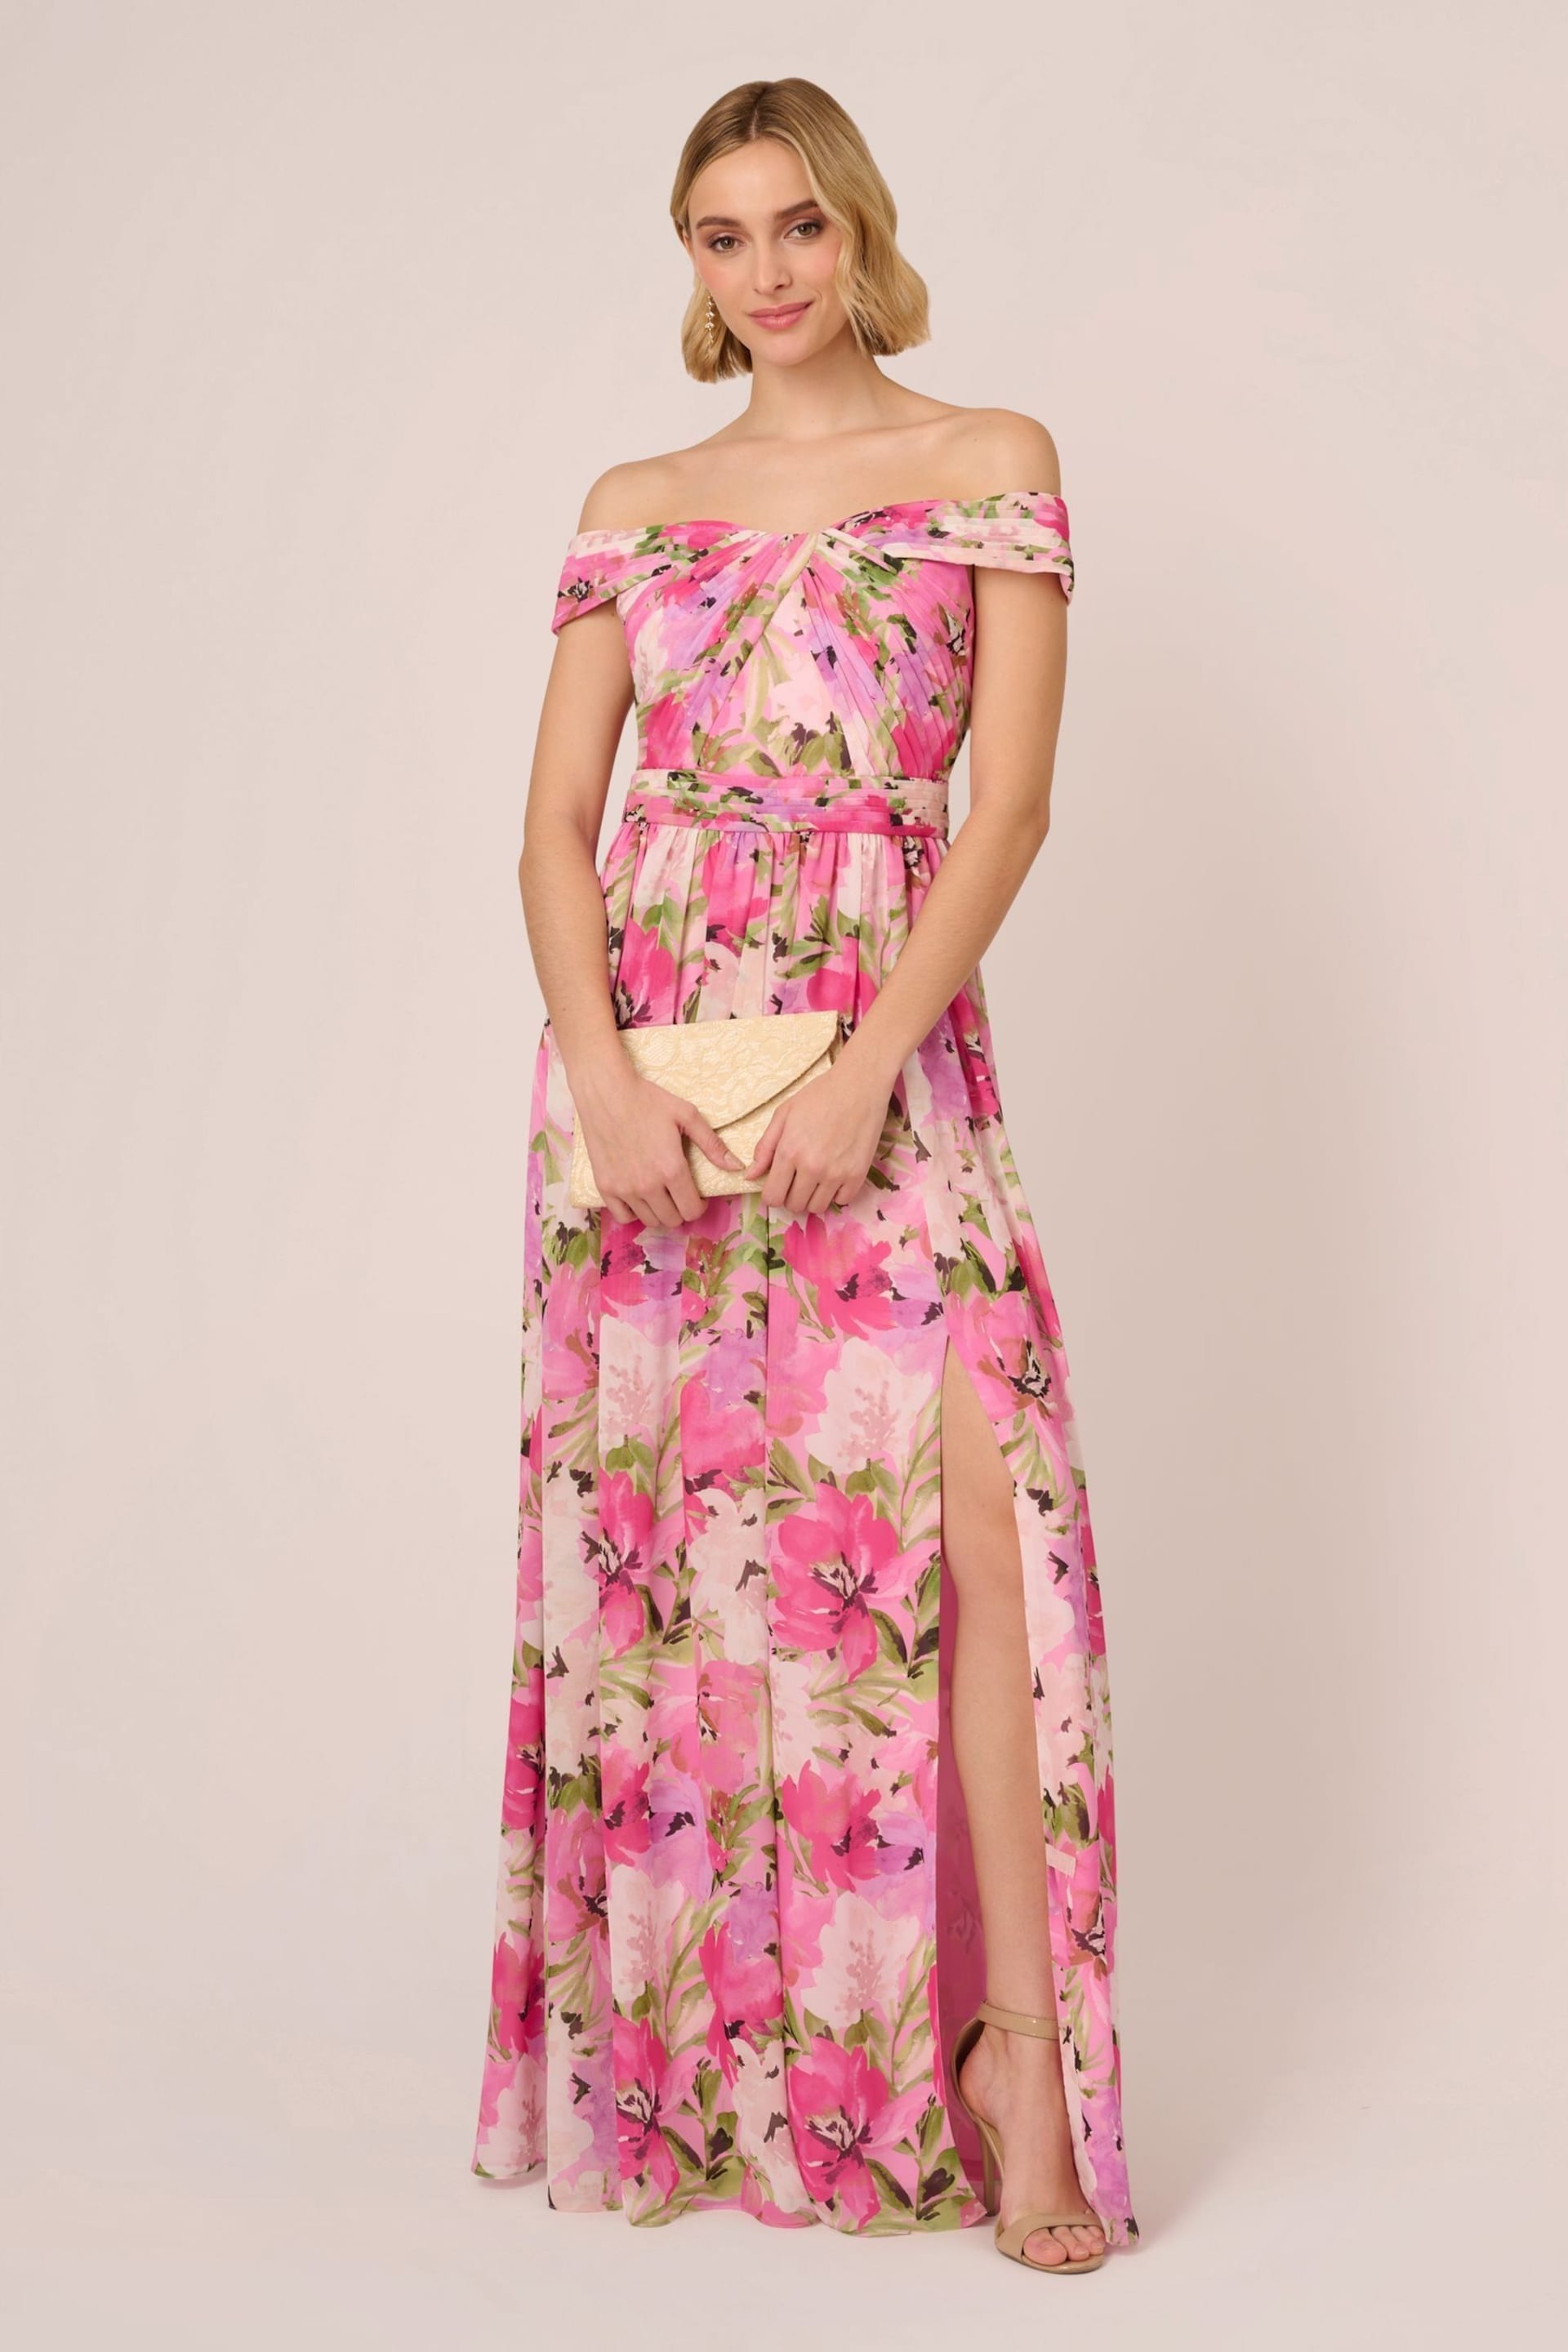 Adrianna Papell Pink Printed Off-Sholder Dress - Image 3 of 7